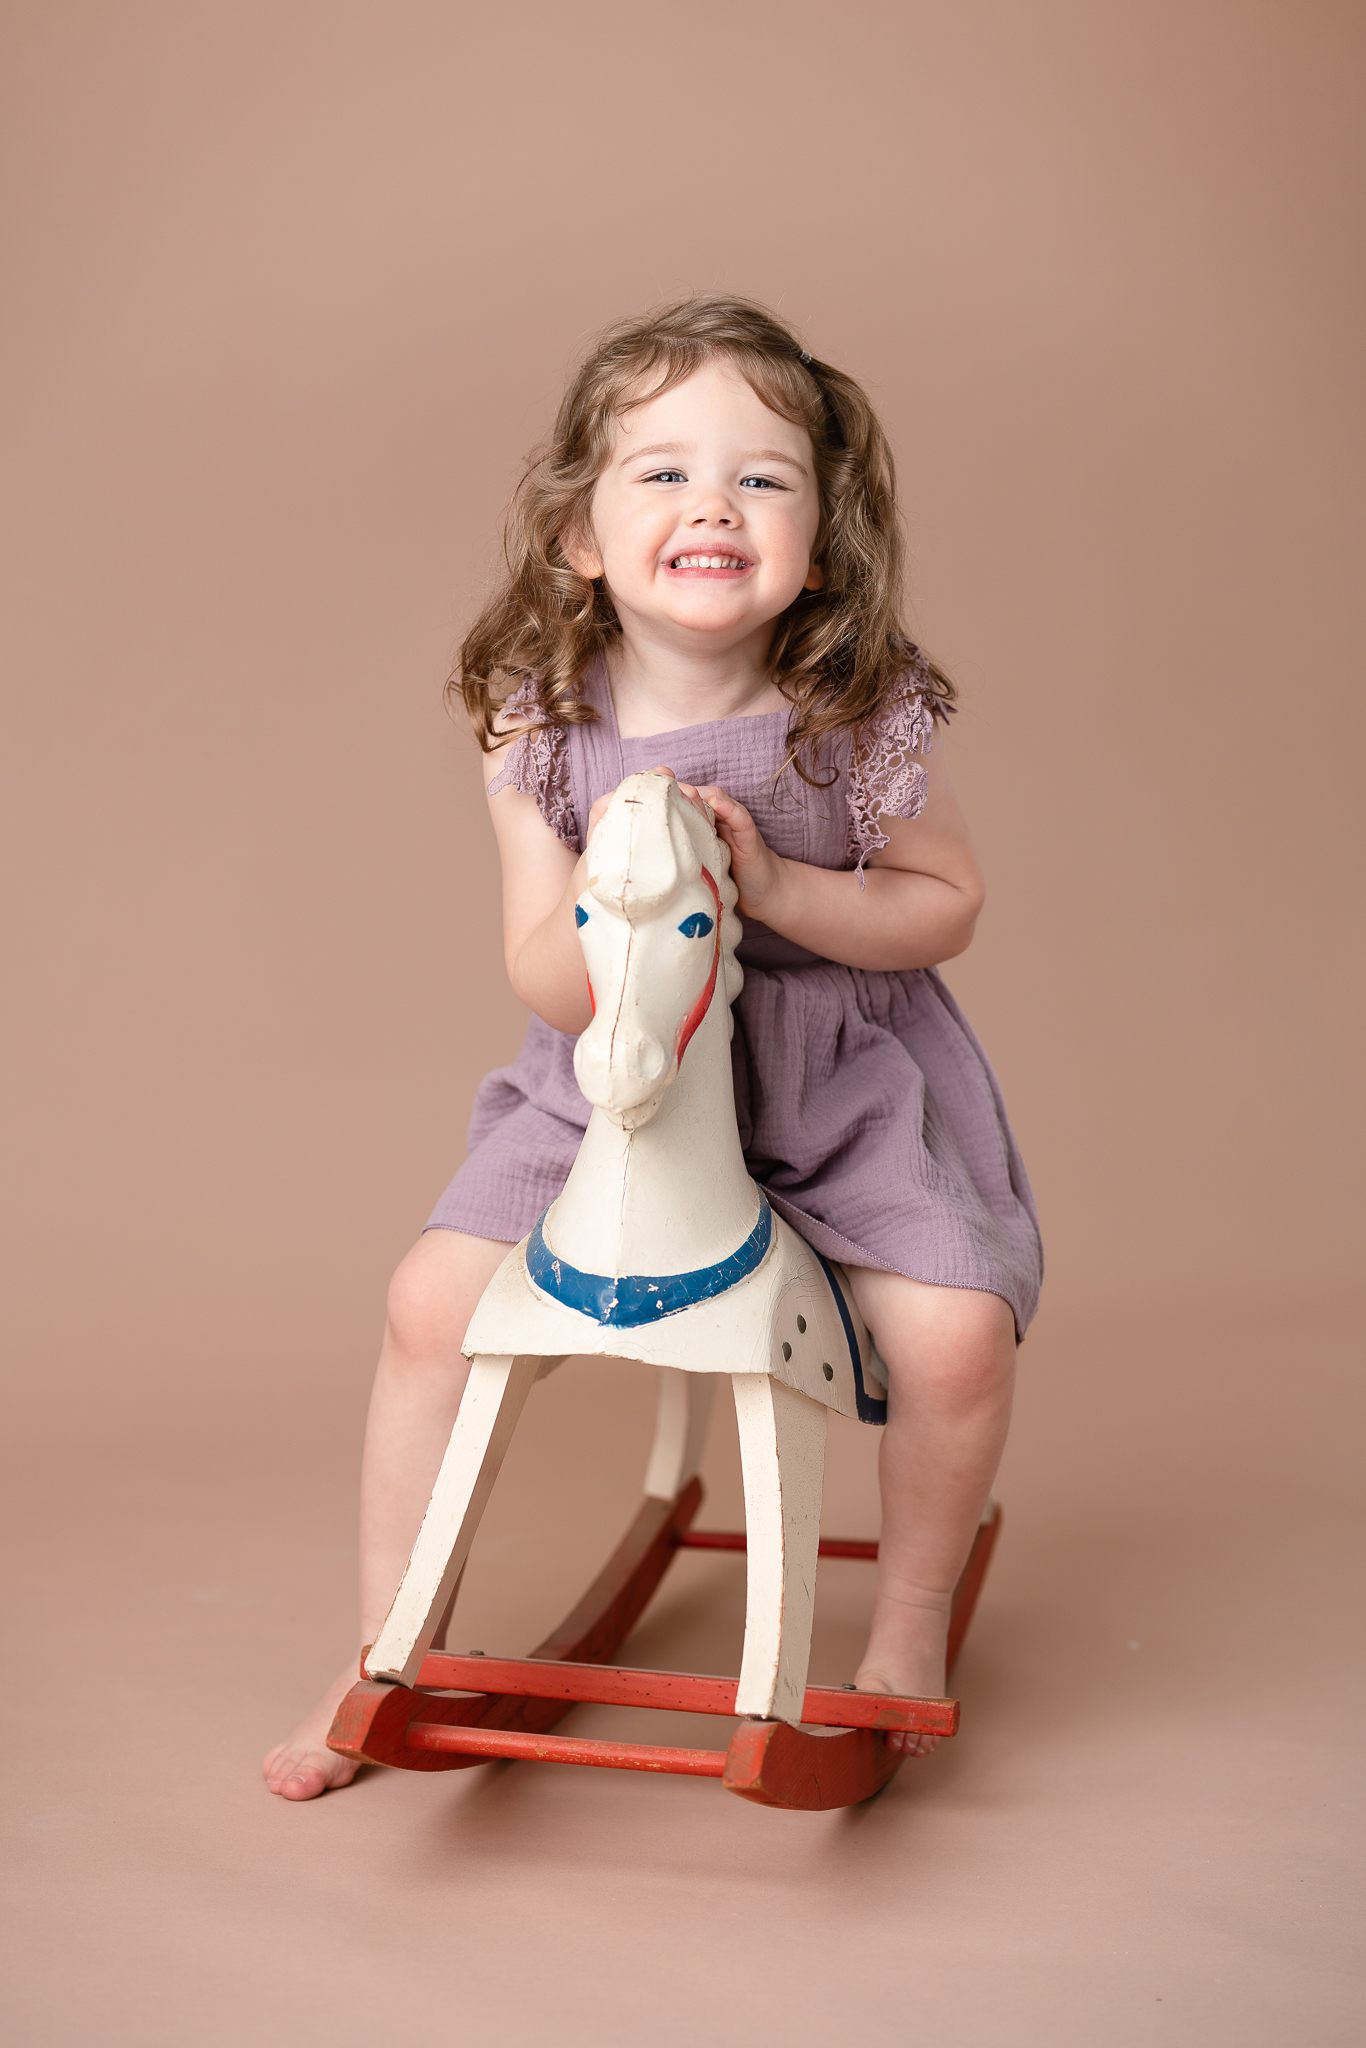 A little girl in a purple dress is smiling as she sits on a colorful wooden rocking horse.